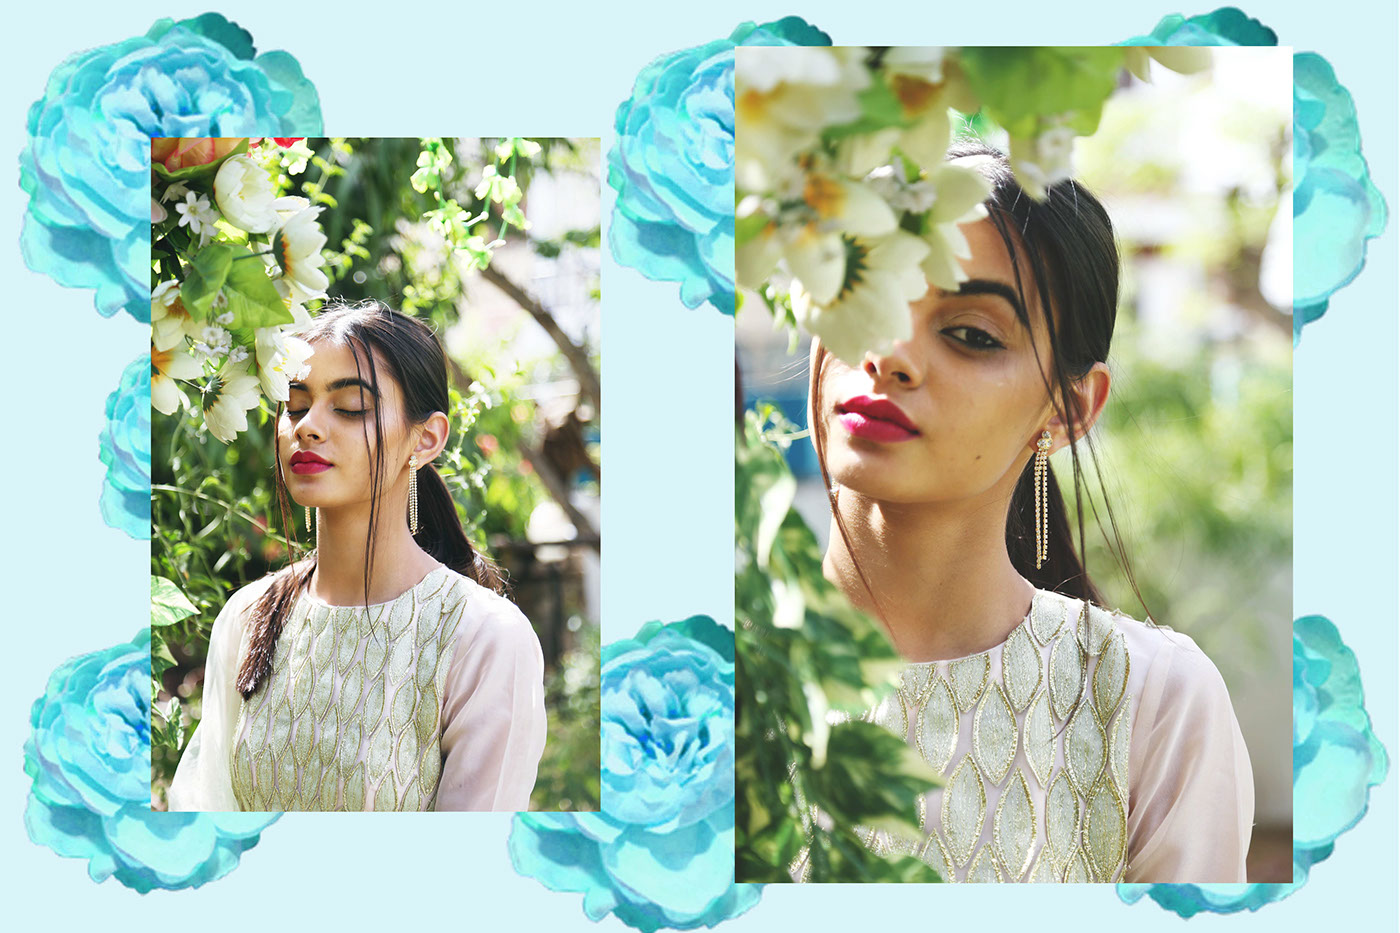 florals Indian wear bridal look book photoshoot Fashion  INDIAN FASHION flower power editorial Style beauty